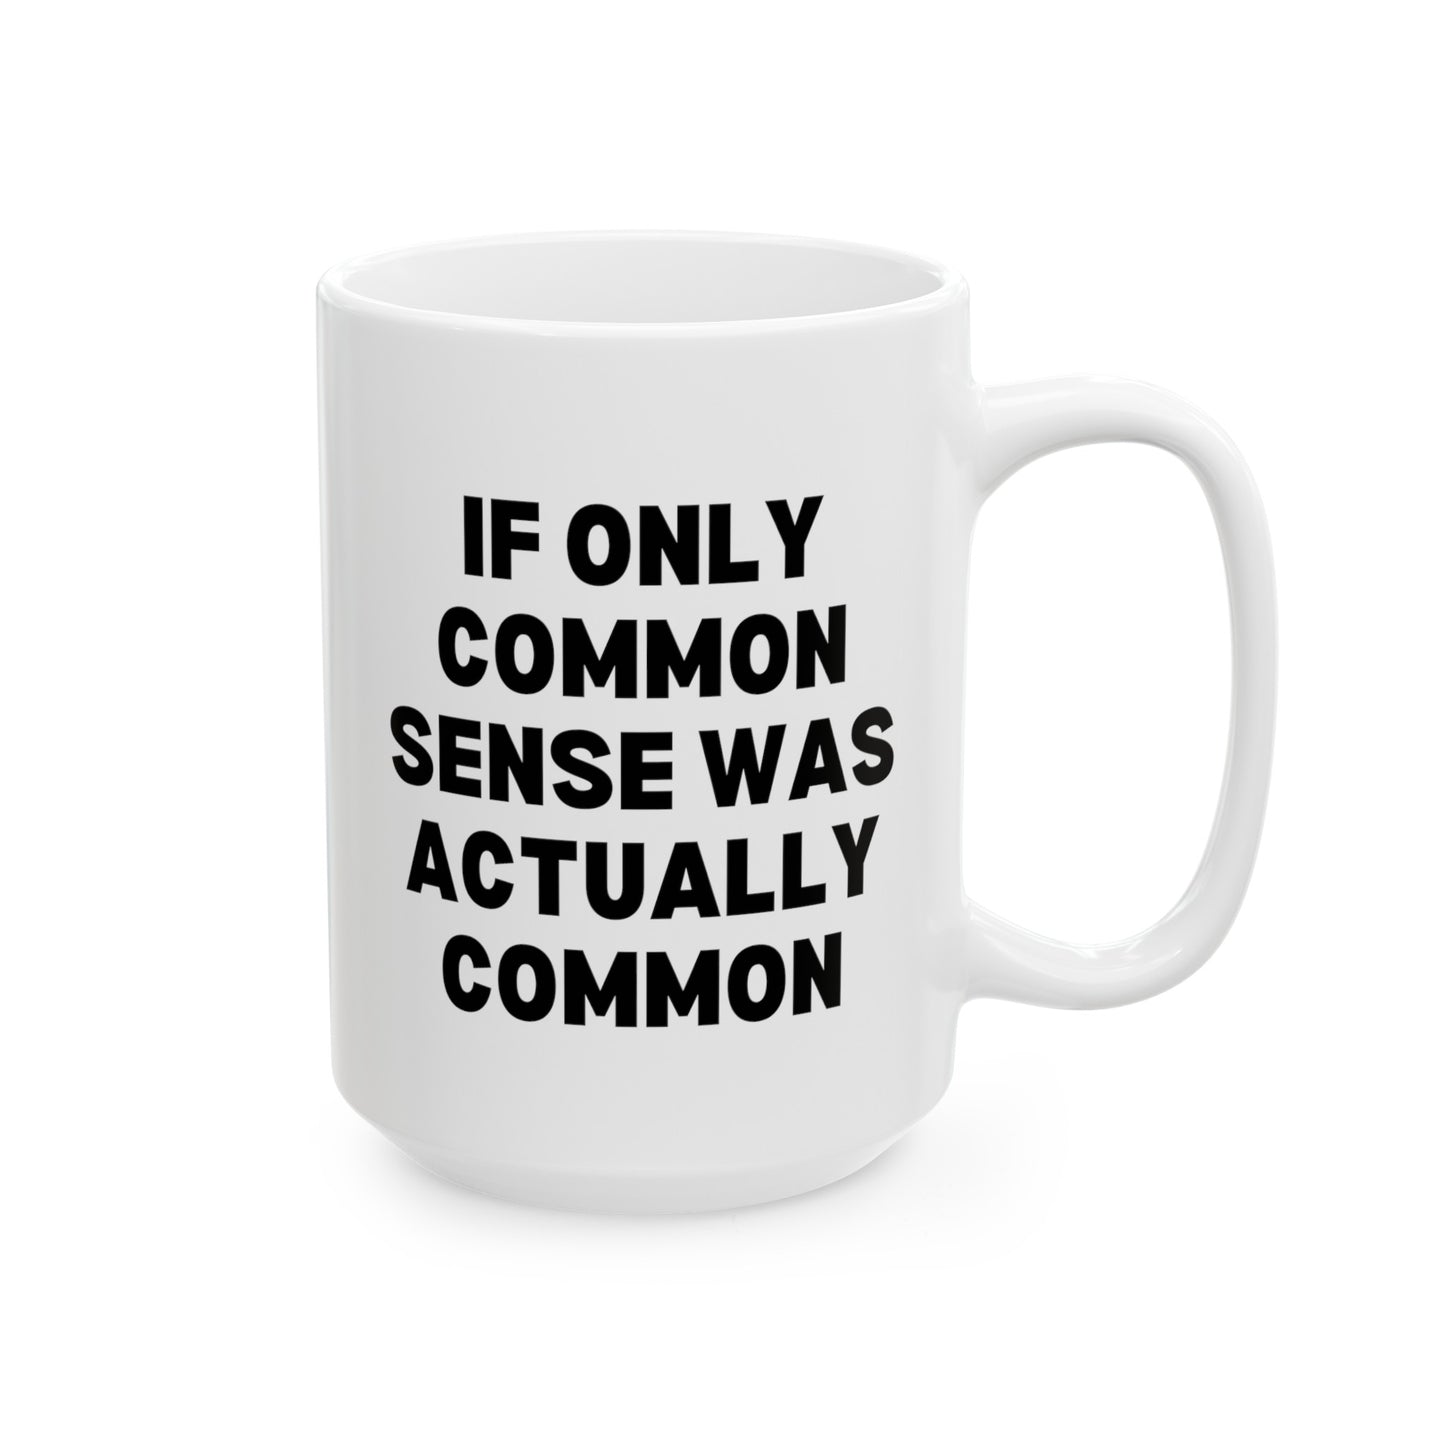 If Only Common Sense Was Actually Common 15oz white funny large coffee mug gift for morning person coworker secret santa sarcasm sarcastic waveywares wavey wares wavywares wavy wares